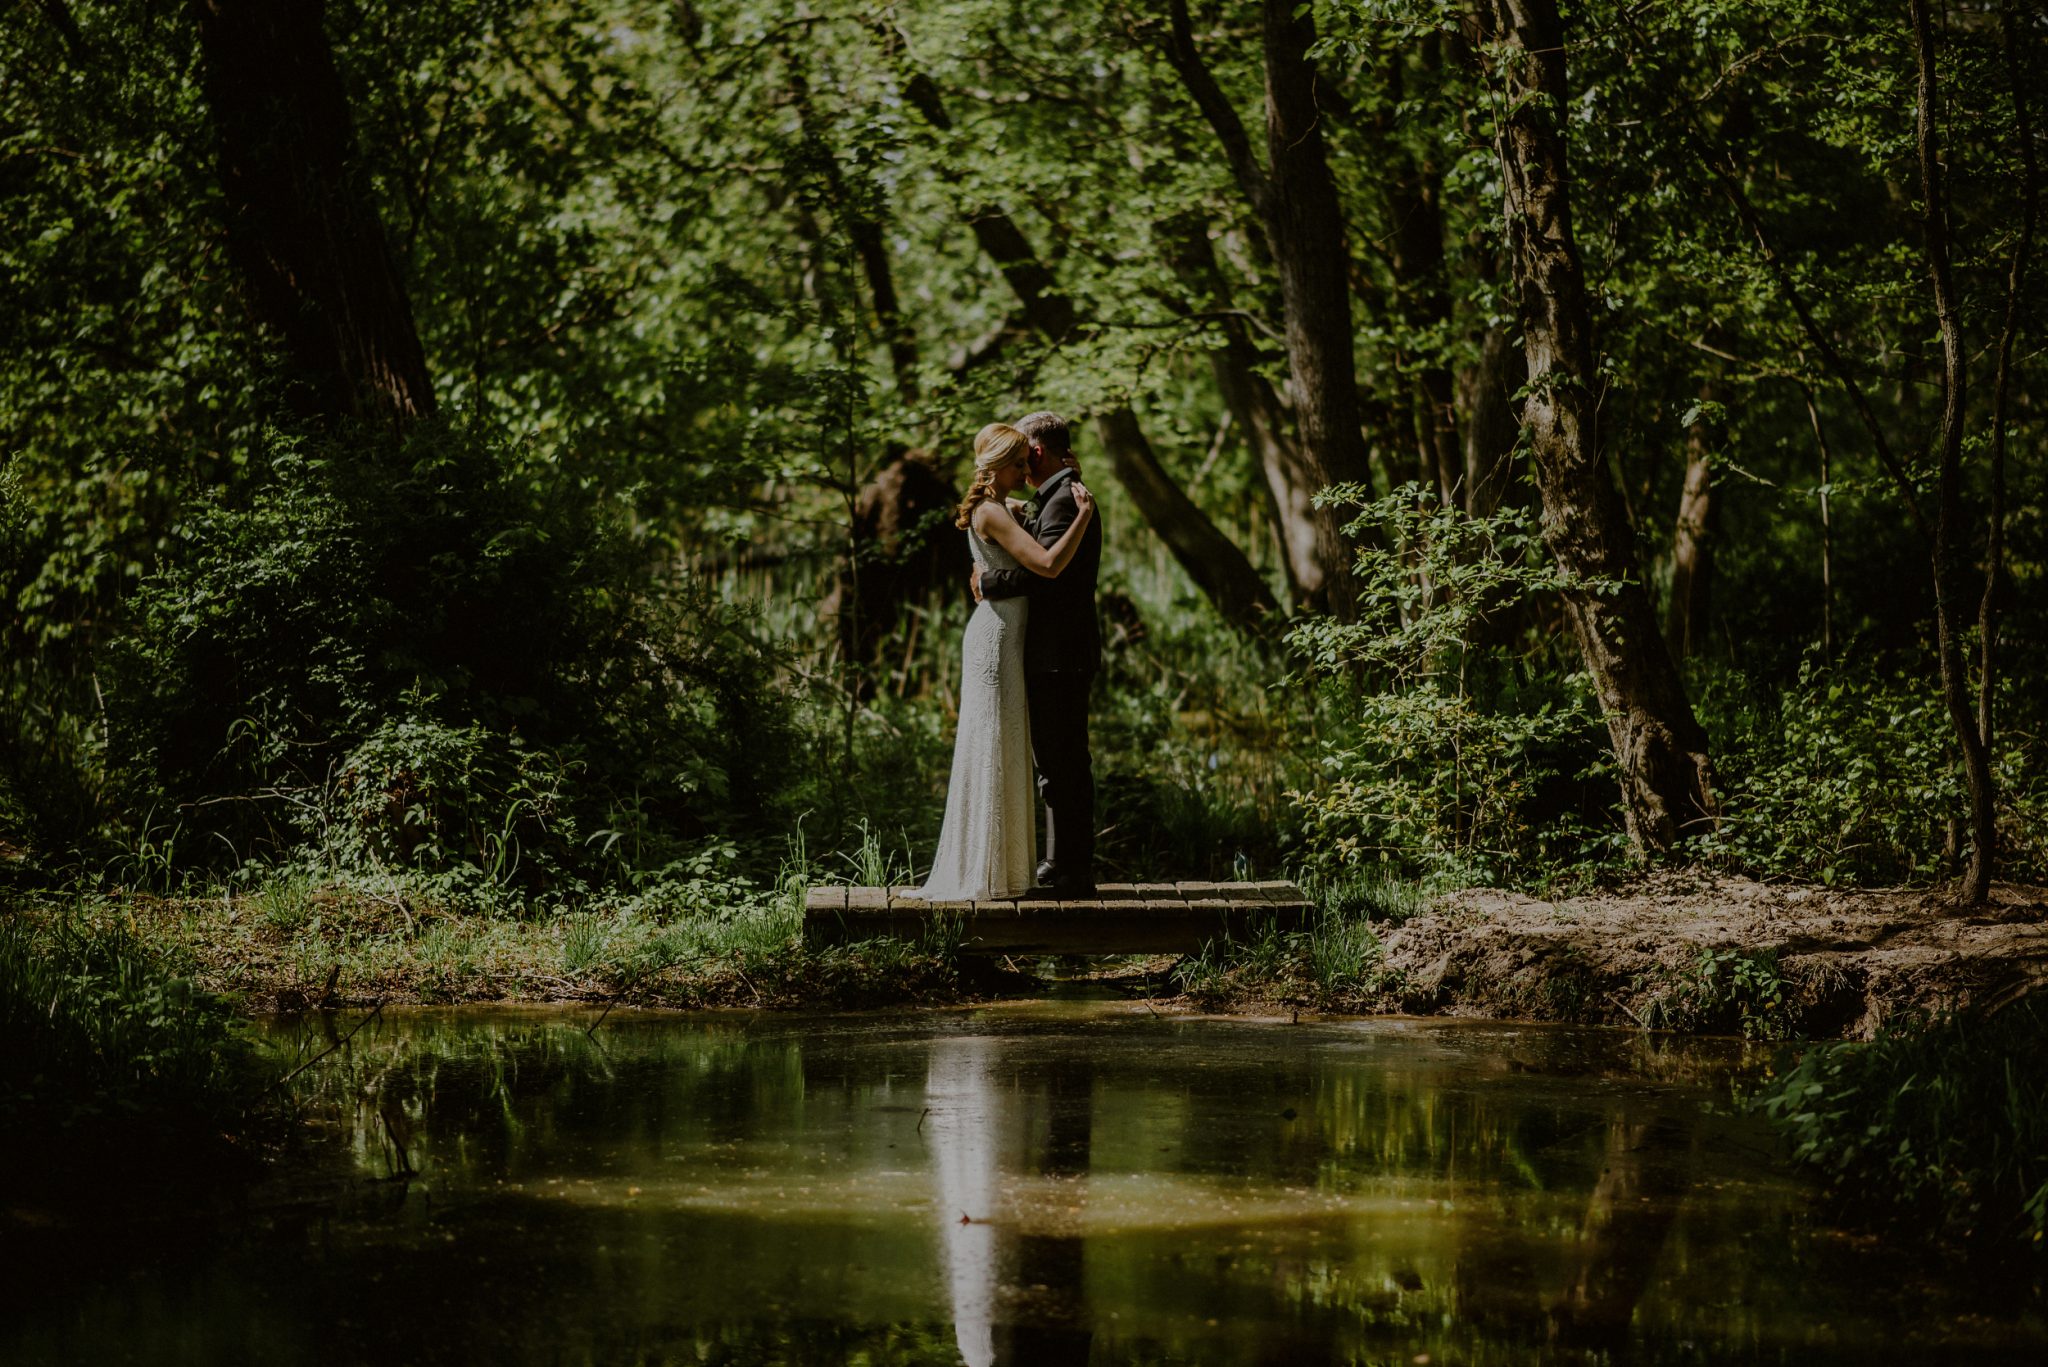 artistic wedding portrait of bride and groom with reflection